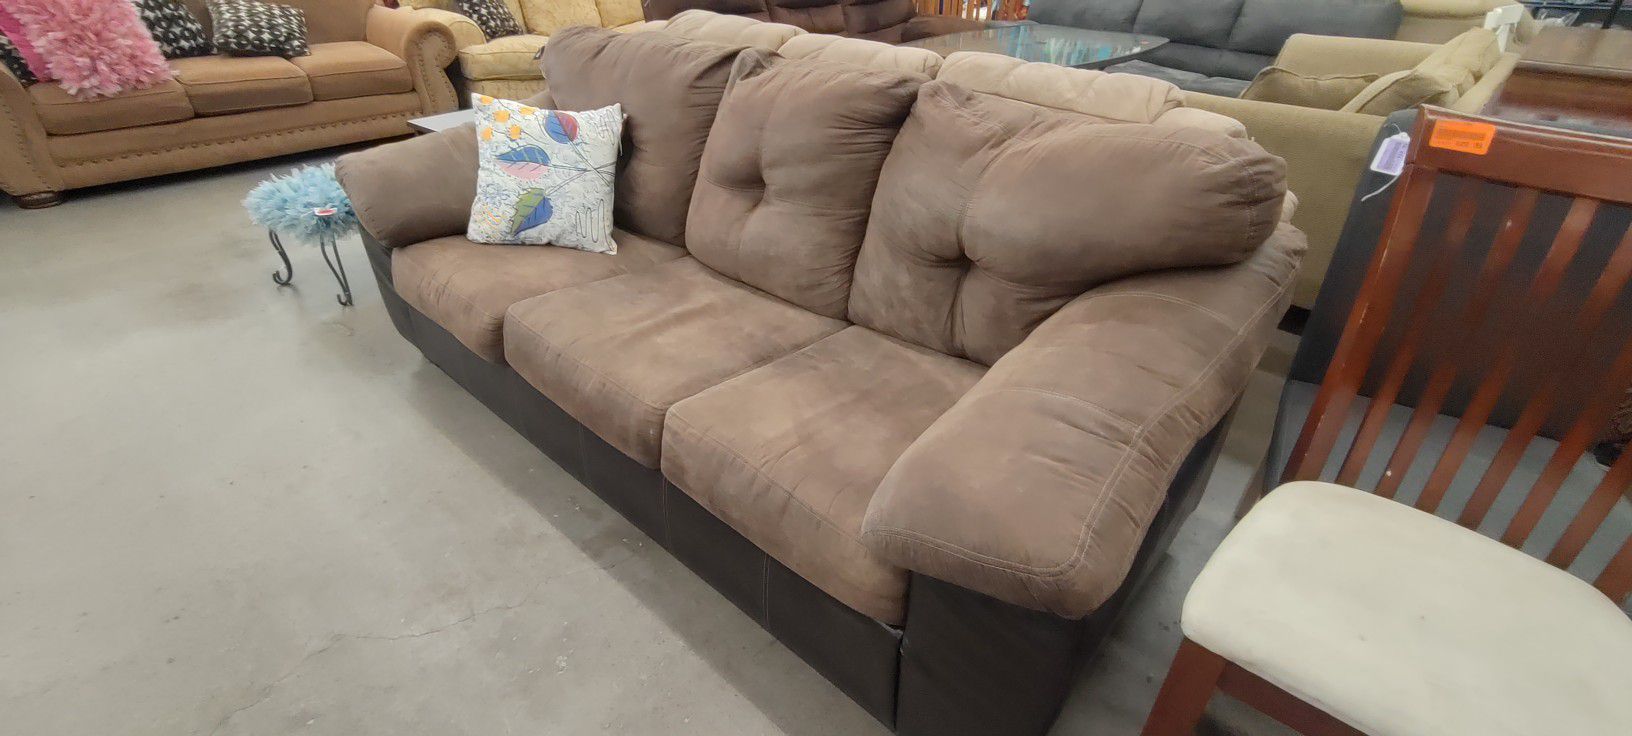 Couch And Recliner 